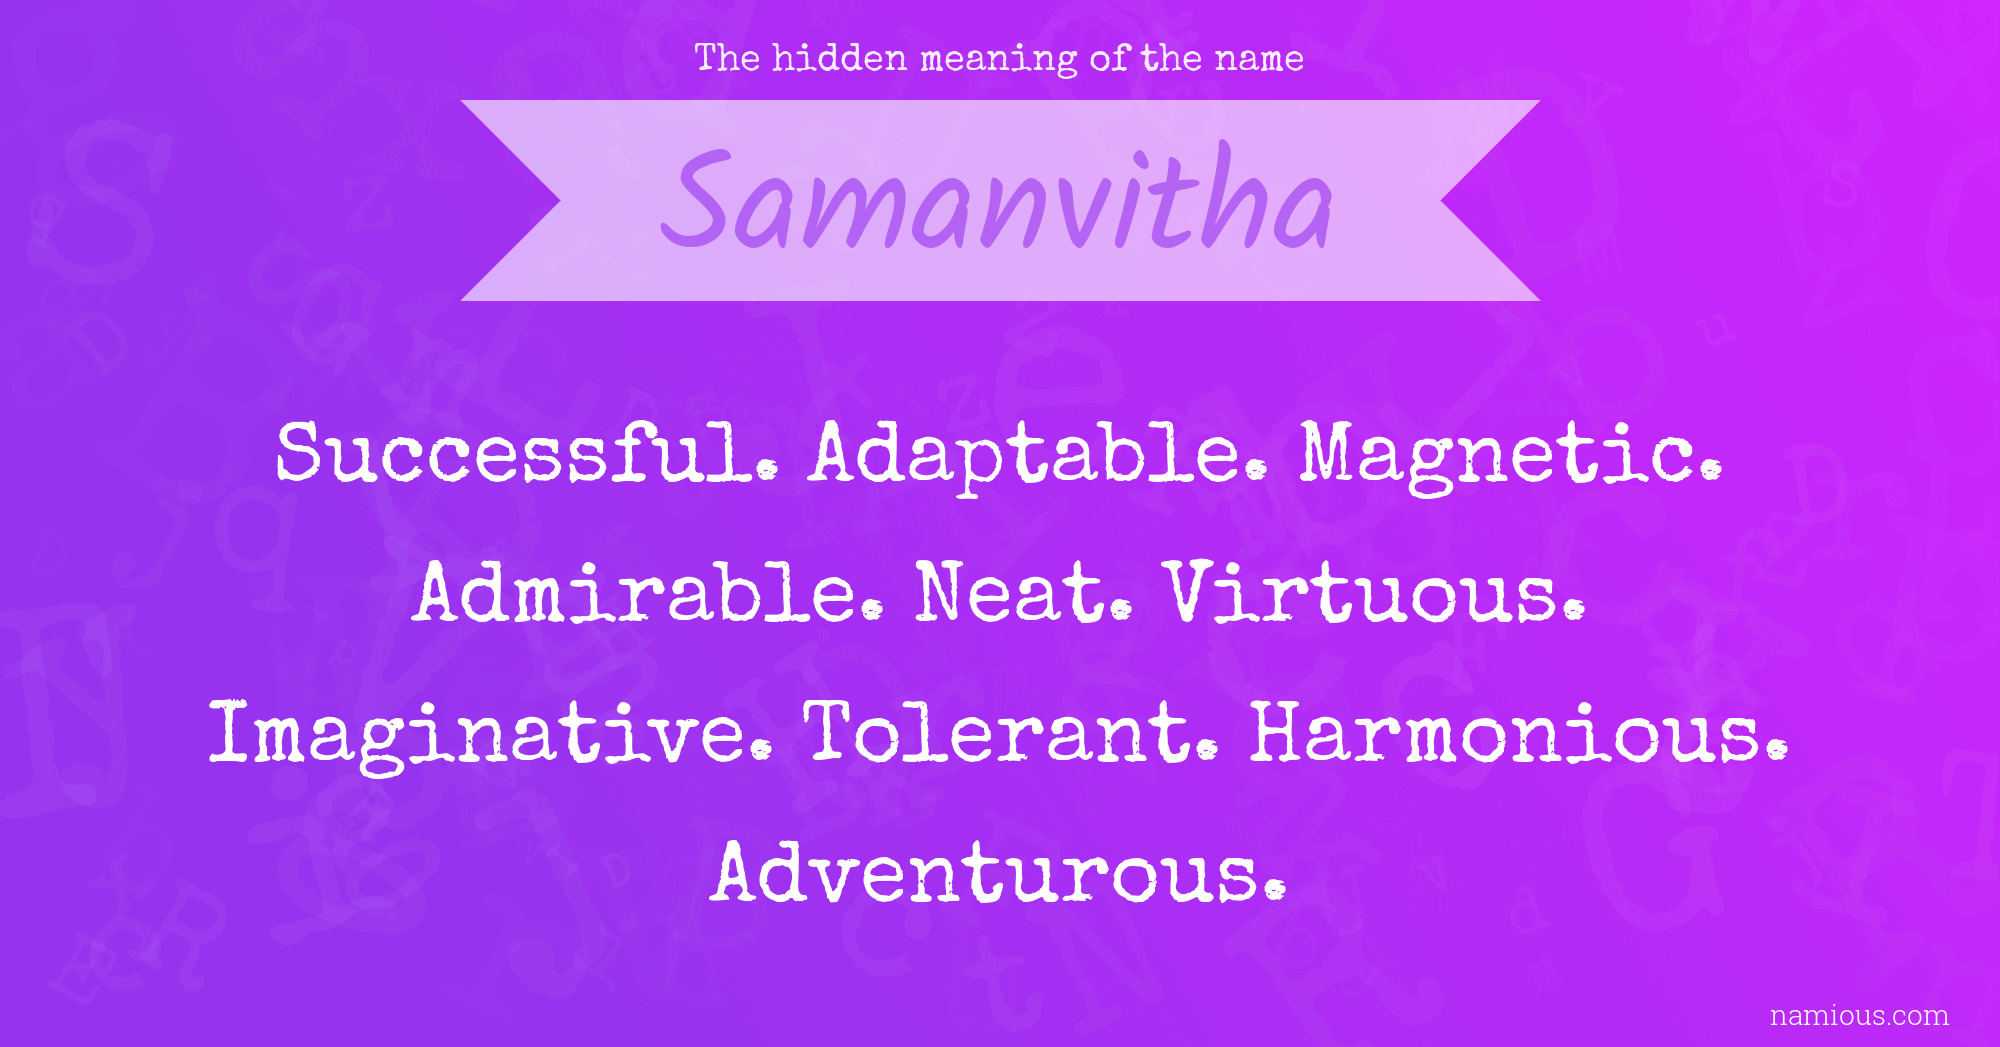 The hidden meaning of the name Samanvitha